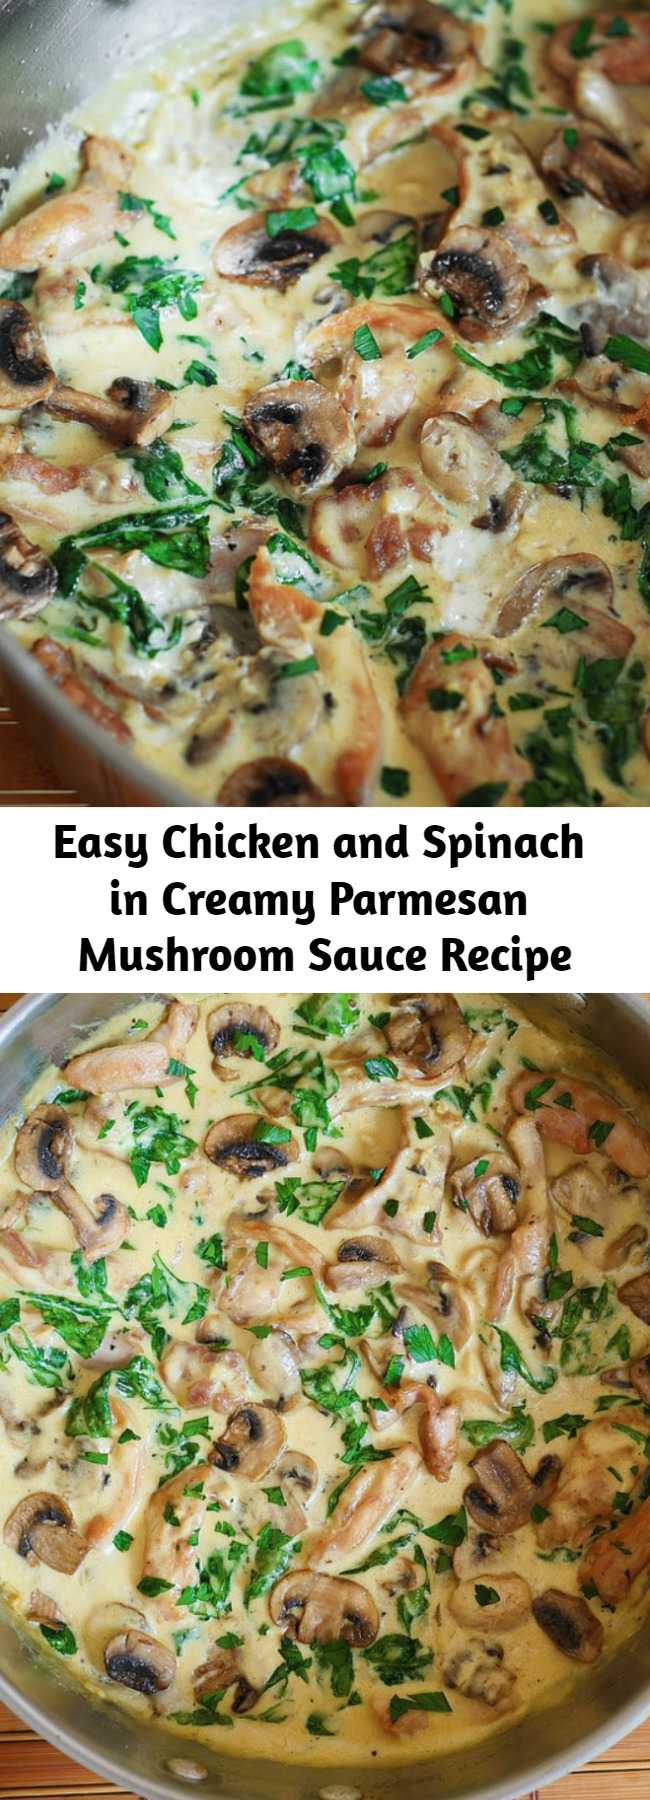 Easy Chicken and Spinach in Creamy Parmesan Mushroom Sauce Recipe - Chicken and Spinach in Creamy Parmesan Mushroom Sauce is your perfect comfort food as well as an easy midweek dinner! Using boneless and skinless chicken thighs guarantees juicy and tender result